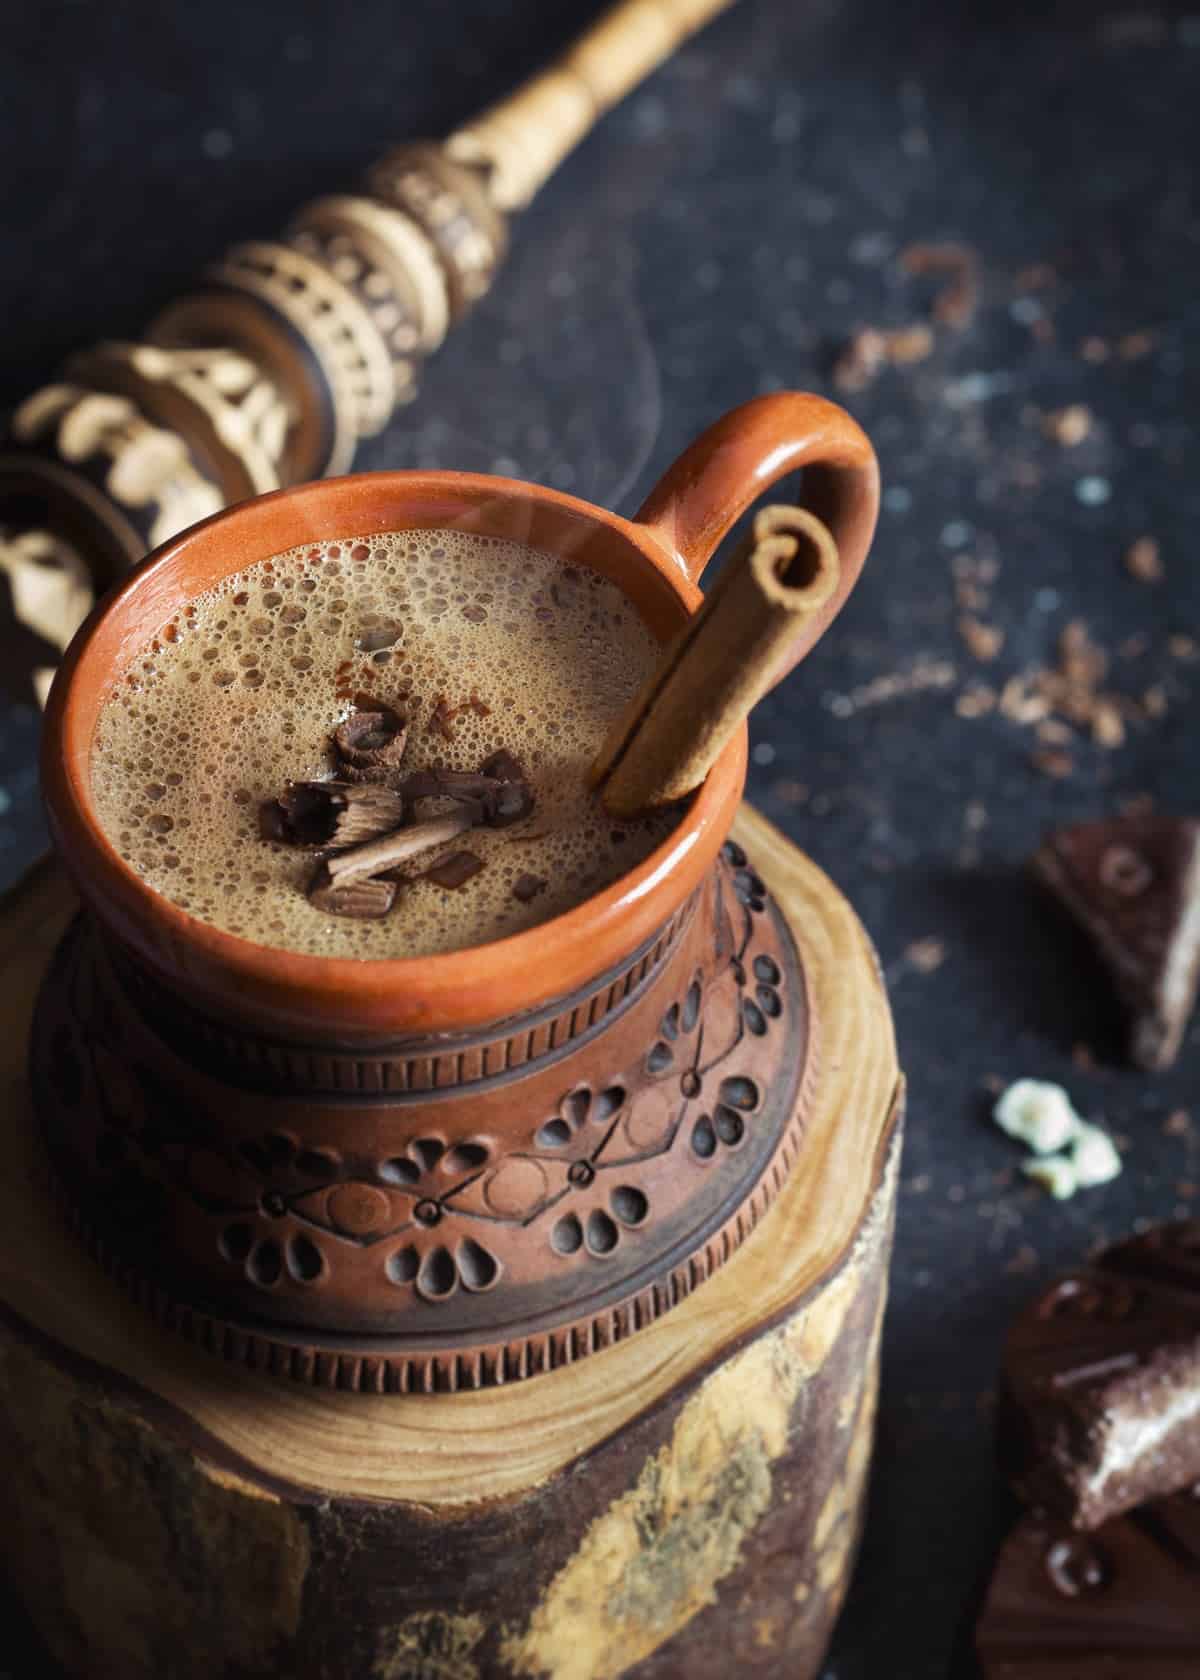 A close up of the hot chocolate drink with cinnamon.